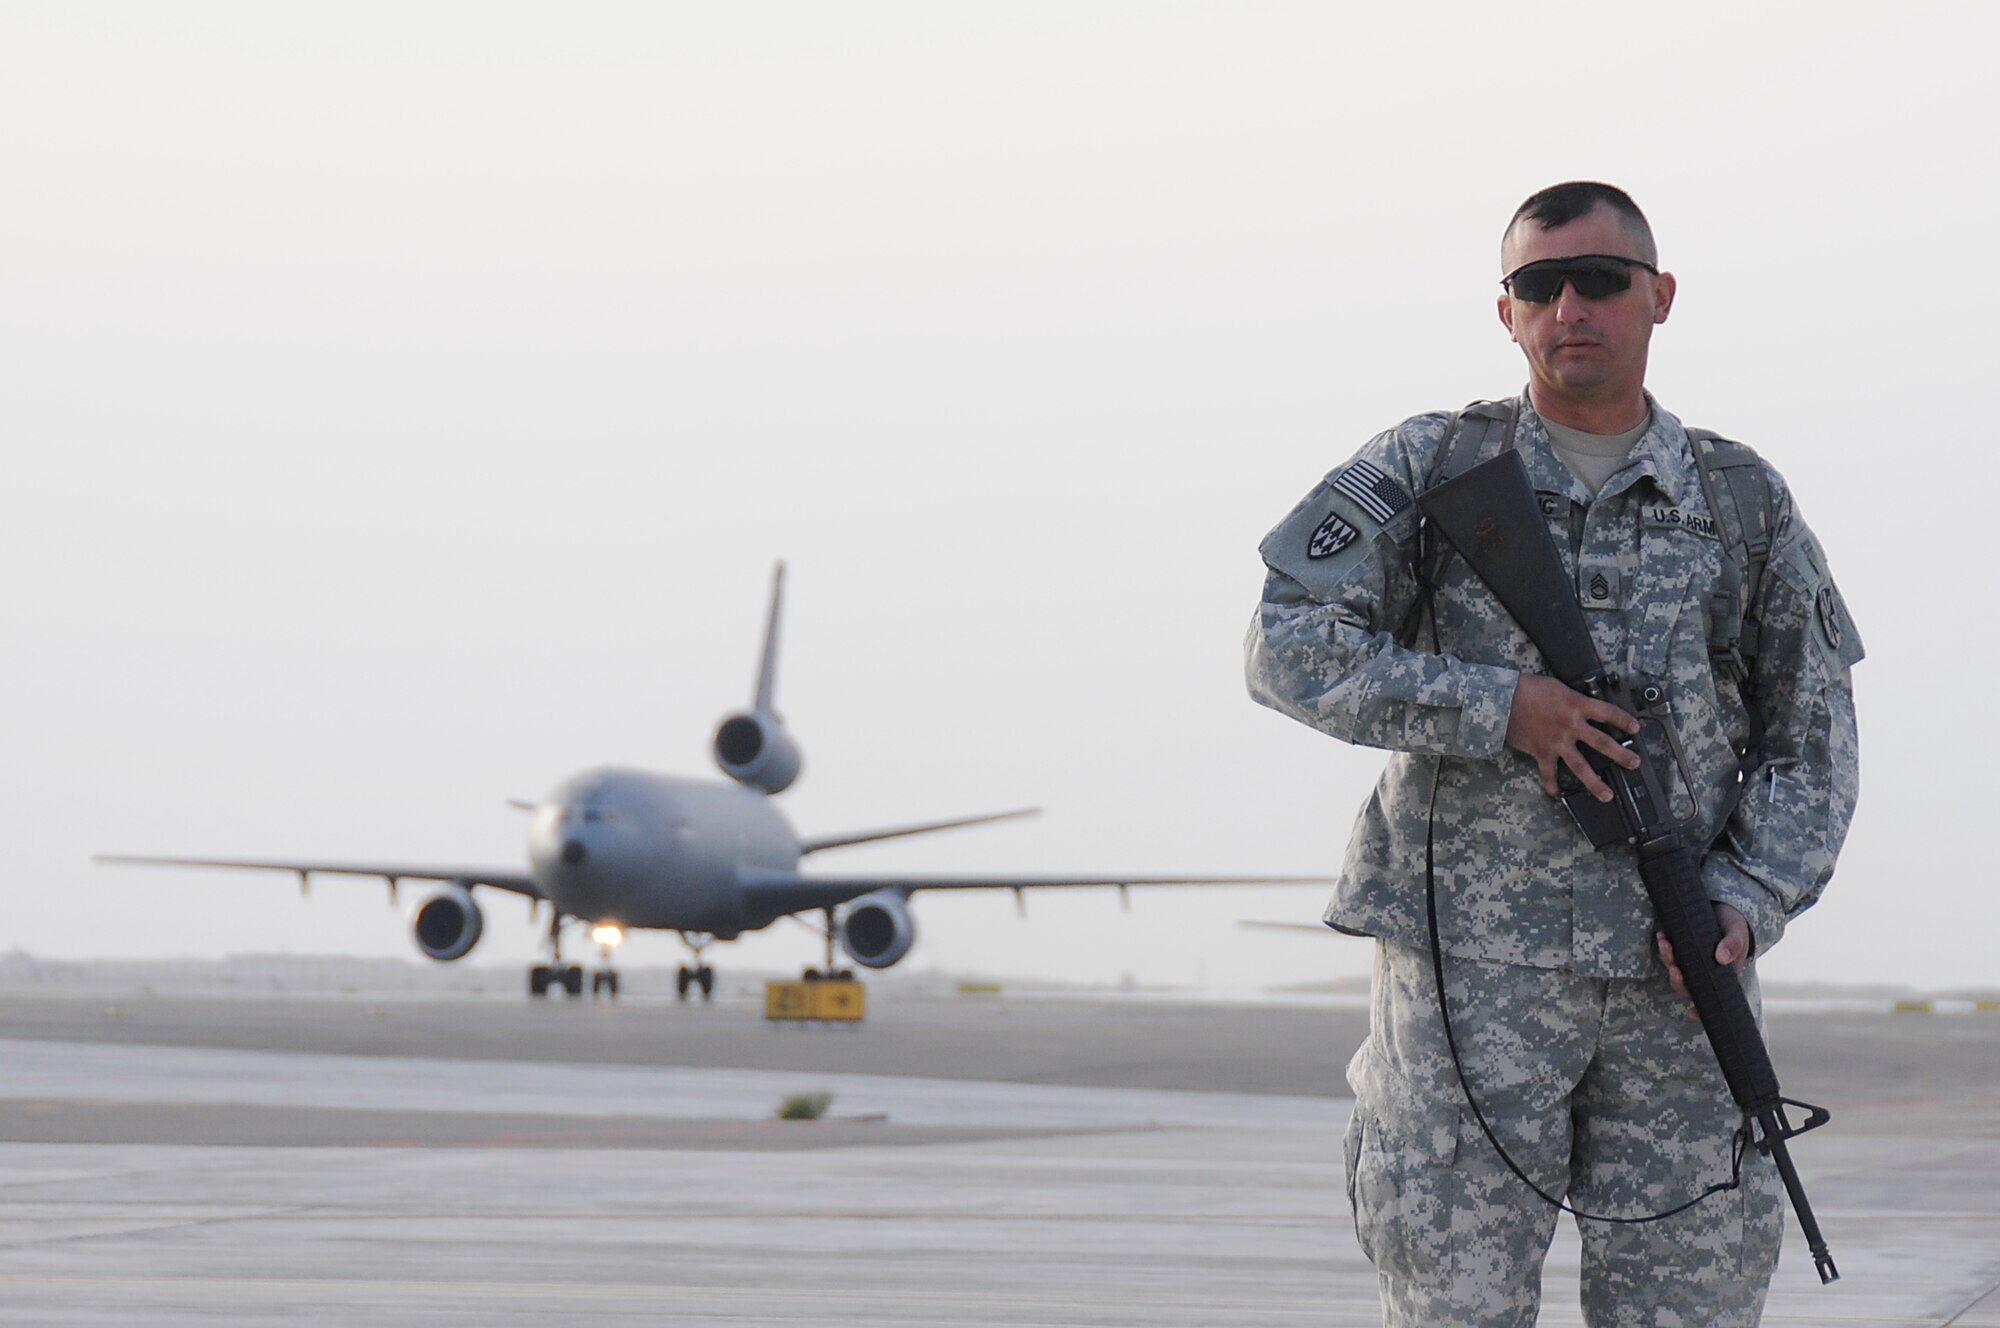 SOUTHWEST ASIA - A Soldier from the 5-52 Air Defense Artillery Battalion stands on the flightline of the 380th Air Expeditionary Wing as a KC-10 taxis in, Mar 5. Close to 200 Soldiers and several C-5 Galaxy's loaded with vehicles and equipment landed throughout the last few days as part of the first Patriot Battery mission for the wing, improving air defense capability. The Army will be incorporated into the 380th AEW's mission in support of Operations Iraqi and Enduring Freedom and Joint Task Force Horn of Africa. The 5-52 Air Defense Artillery Battalion is deployed out of Fort Bliss, TX. (U.S. Air Force photo by Senior Airman Brian J. Ellis)